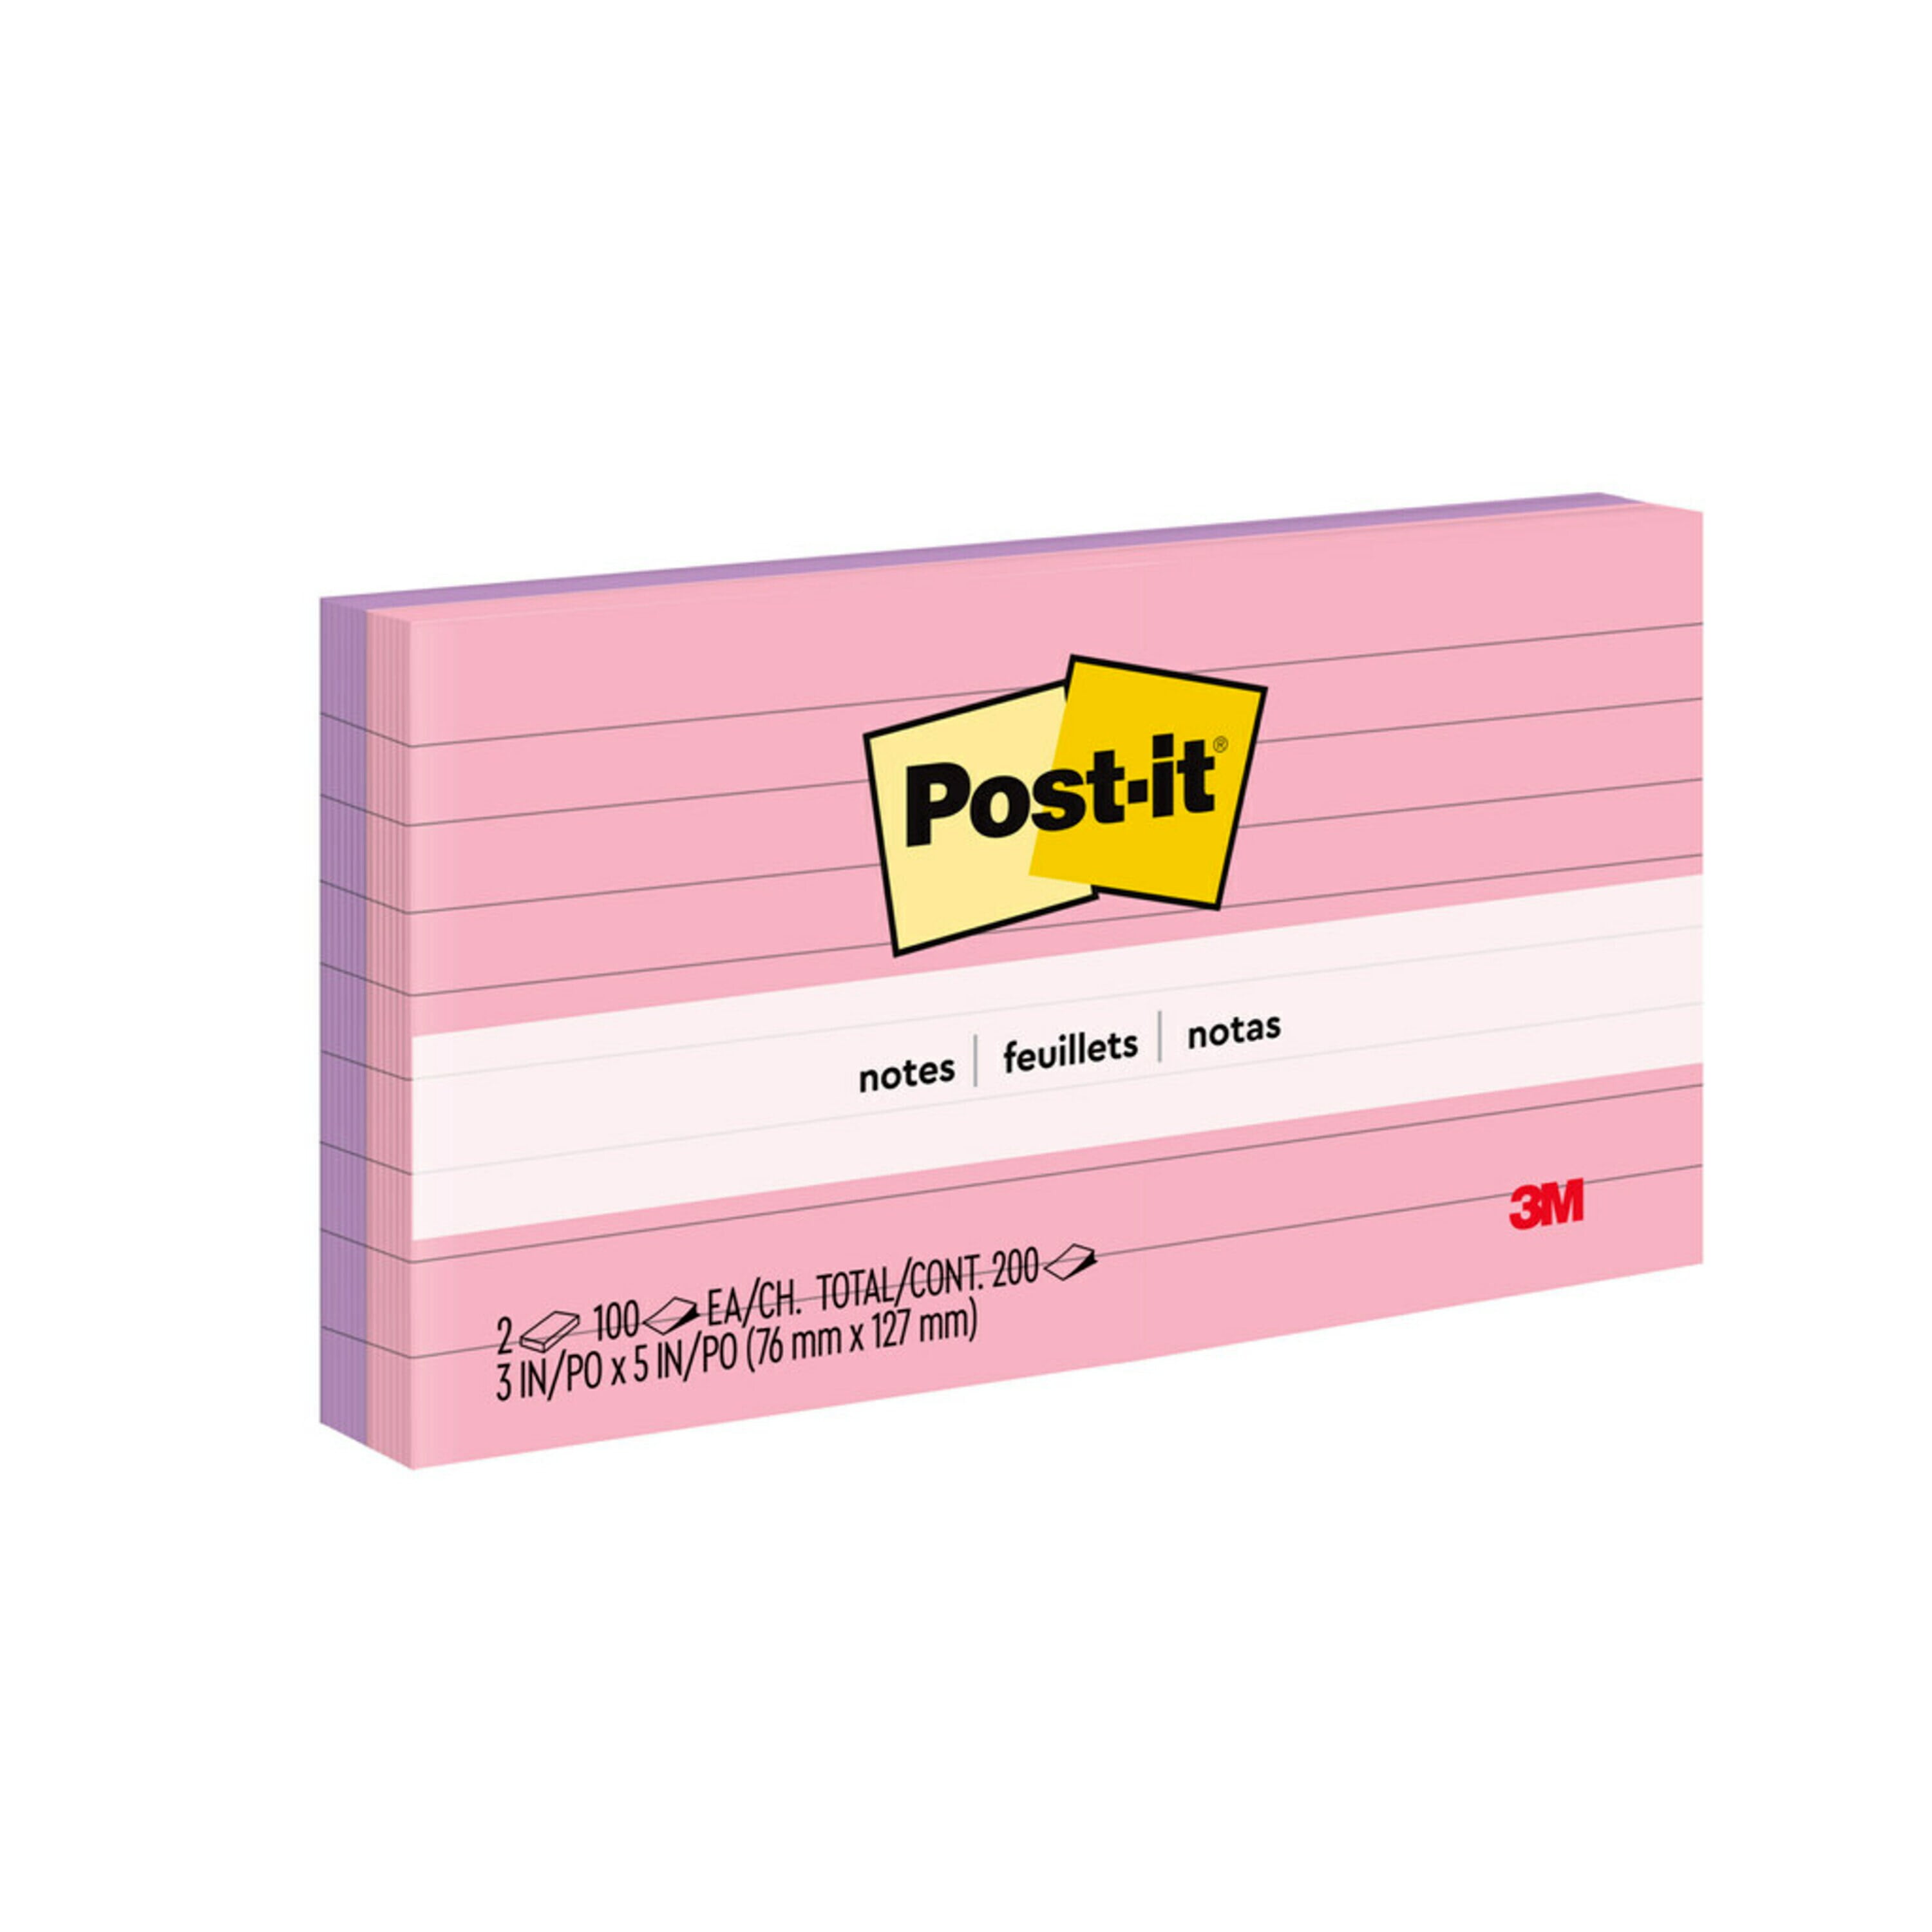 Maustic 24 Pack 3x3 Sticky Notes, 6 Assorted Colors Strong Adhesive  Self-Stick Pads,Easy to Post for School, Home, Office, 74 Sheets/pad